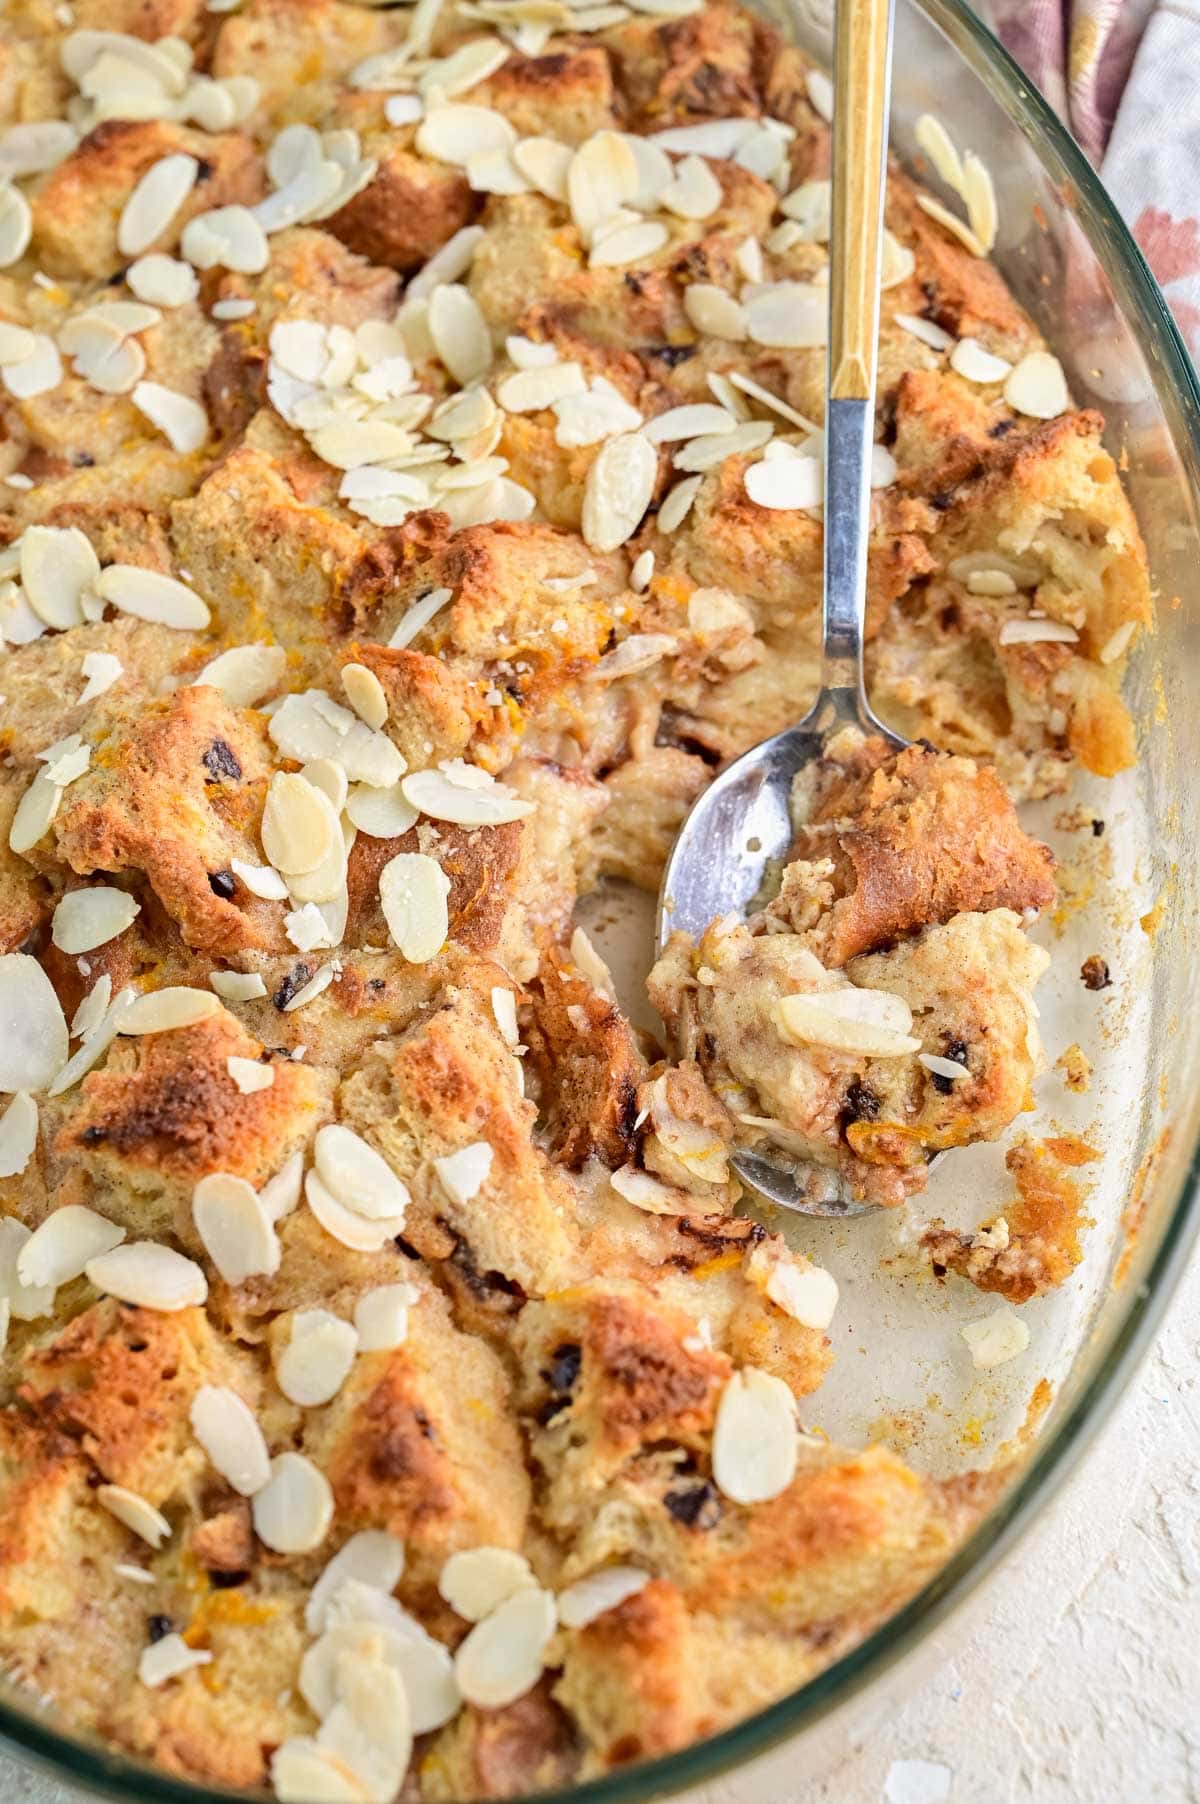 Panettone bread pudding in a baking dish.